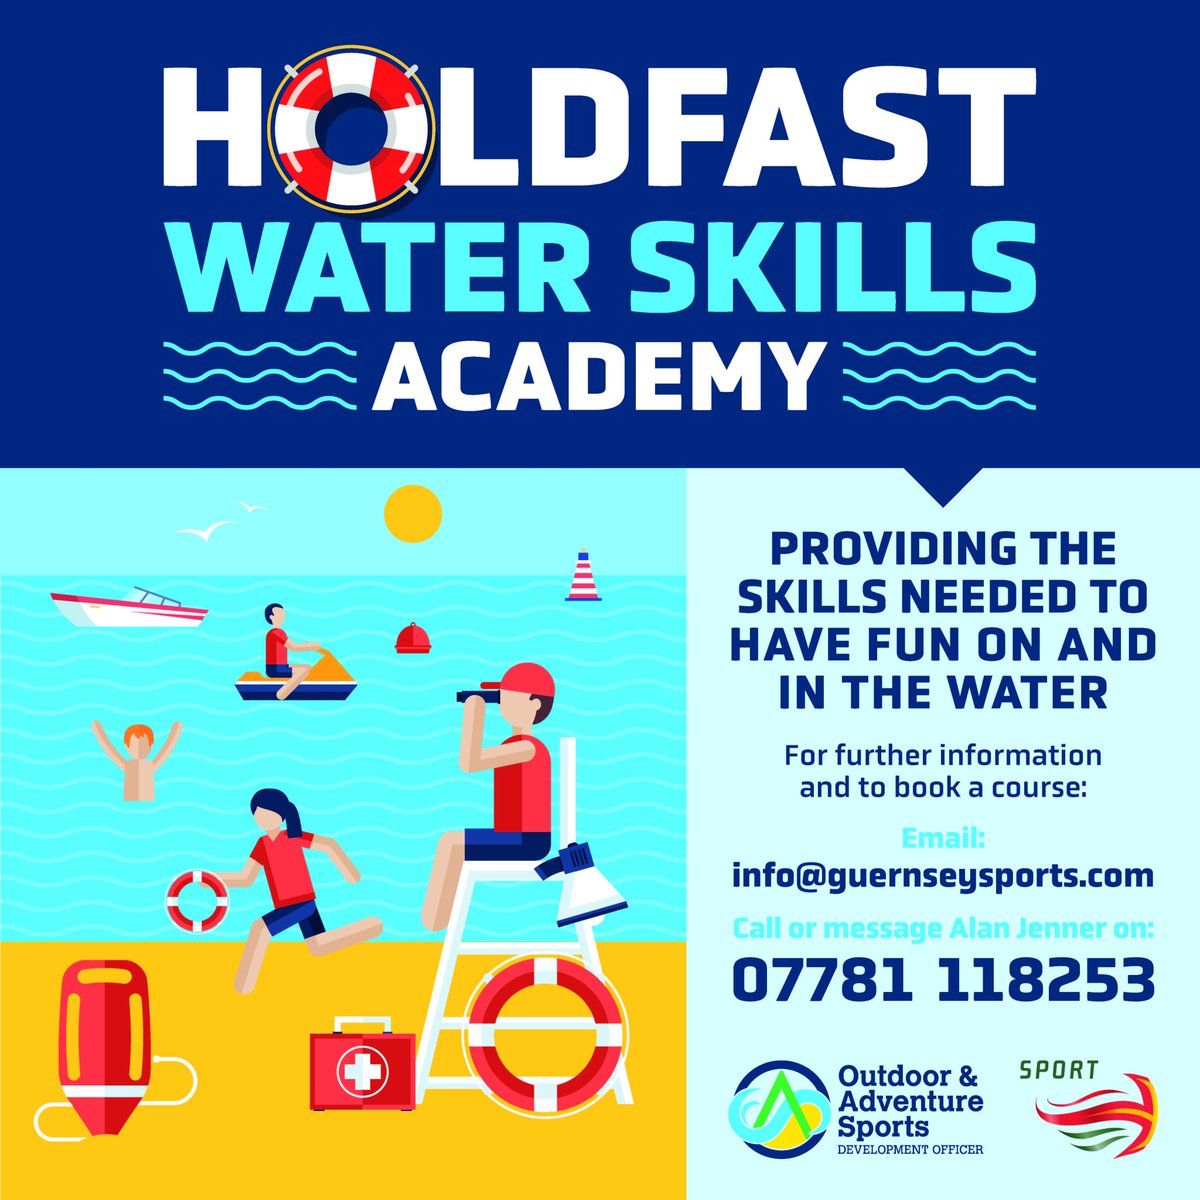 We're excited to be launching our new Water Skills Academy to help improve water safety and provide the community with the skills, confidence and competence to have fun both in and on the water. Check out bit.ly/3vYQOVf for more info #staysafe